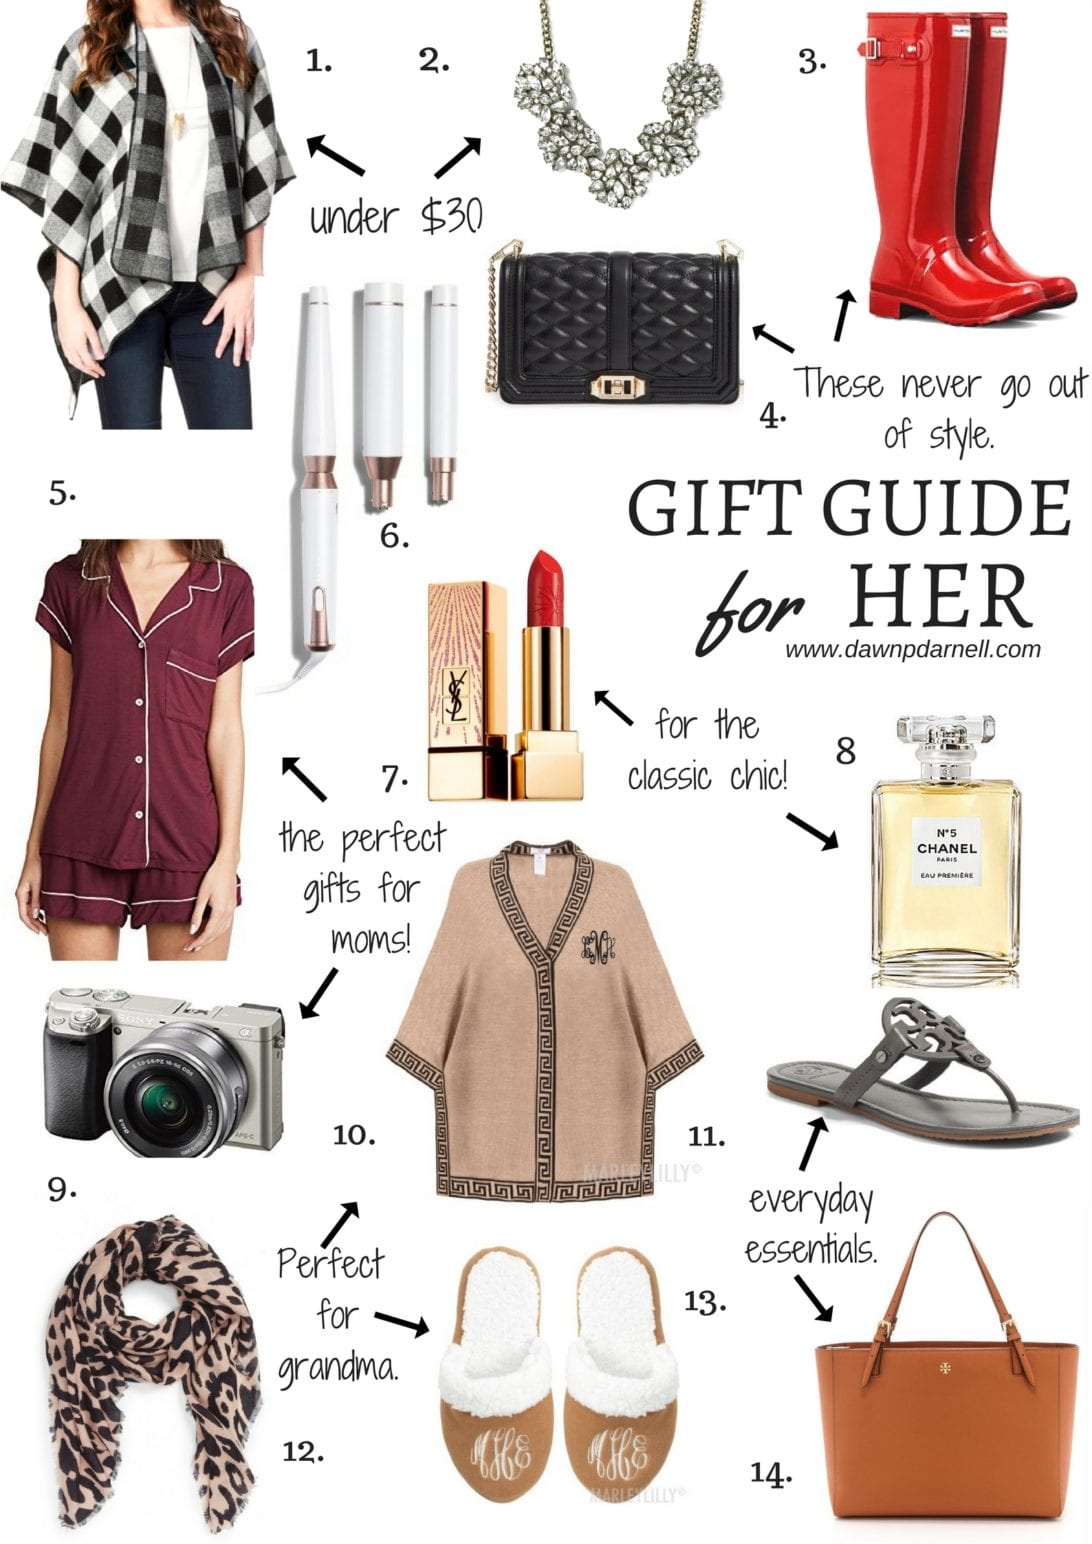 hunter boots, hunter boots outfit, holiday outfits, how to wear hunter boots, christmas outfits with hunter boots, gift guide for her, red hunter boots, hunter boots for the holidays, gift guide for her, tory burch miller sandals, Rebecca Minkoff love crossbody bag, tory burch tote